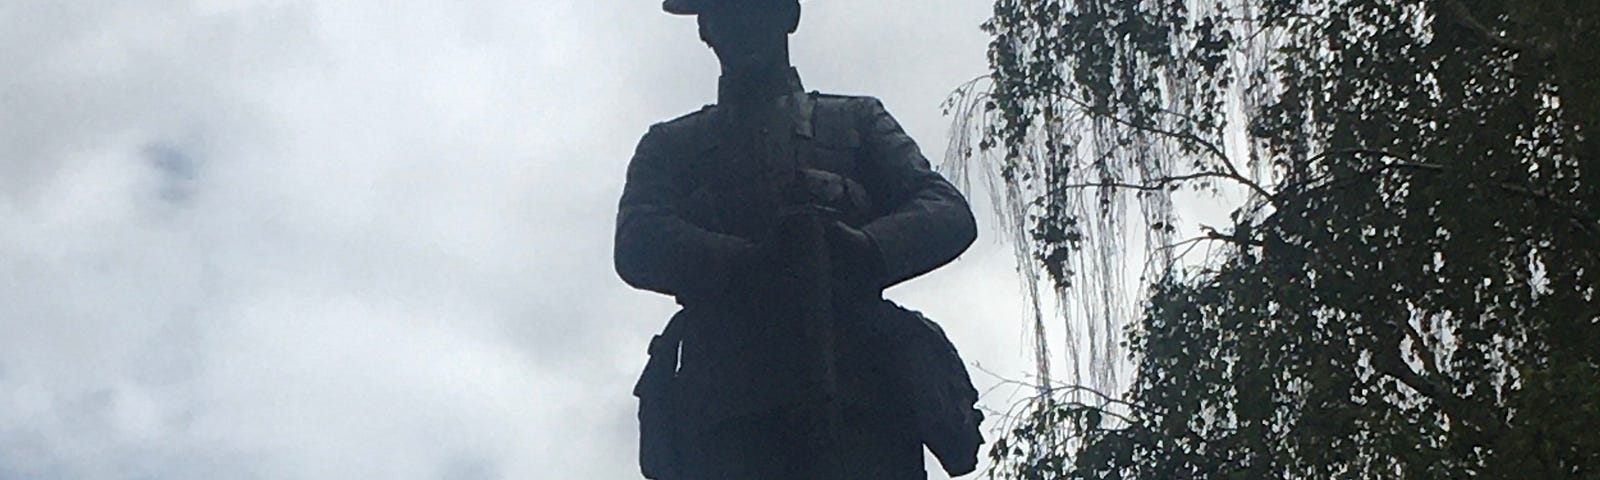 Statue of a Canadian Soldier on top of a local cenotaph. Photo taken by the poet. Credit Jane Harris